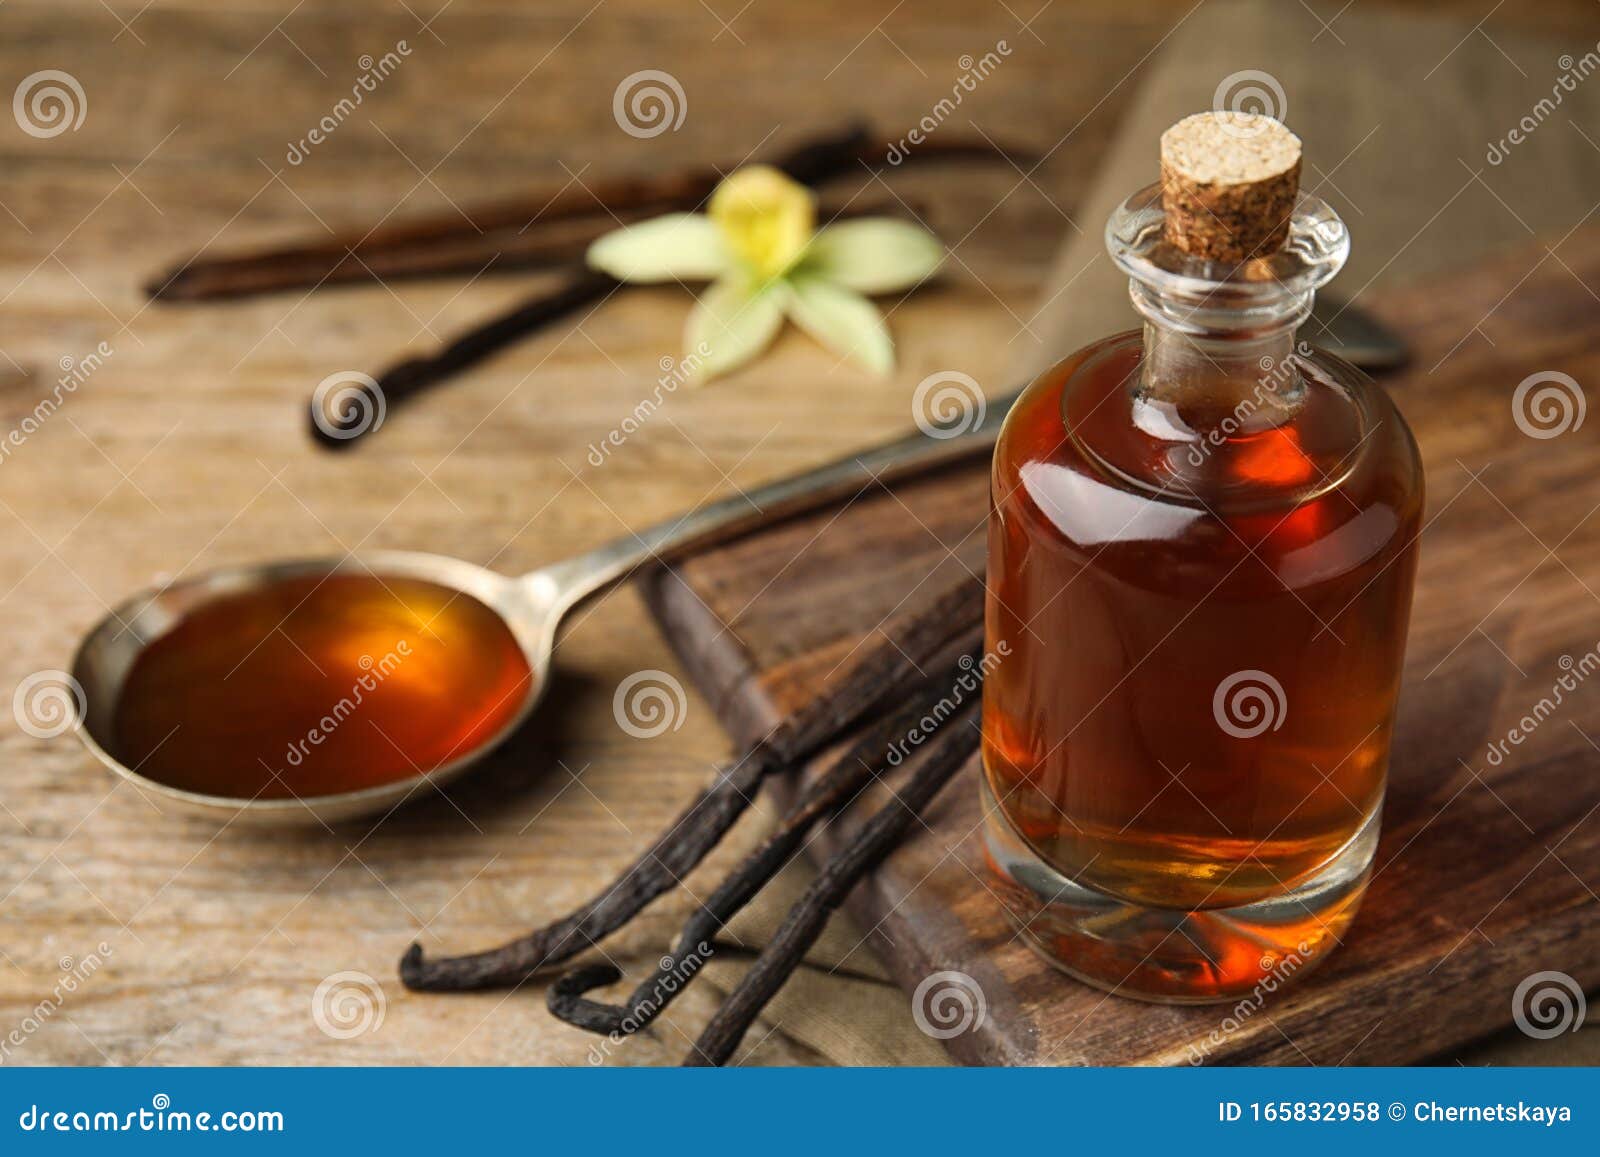 aromatic homemade vanilla extract on wooden table. space for text